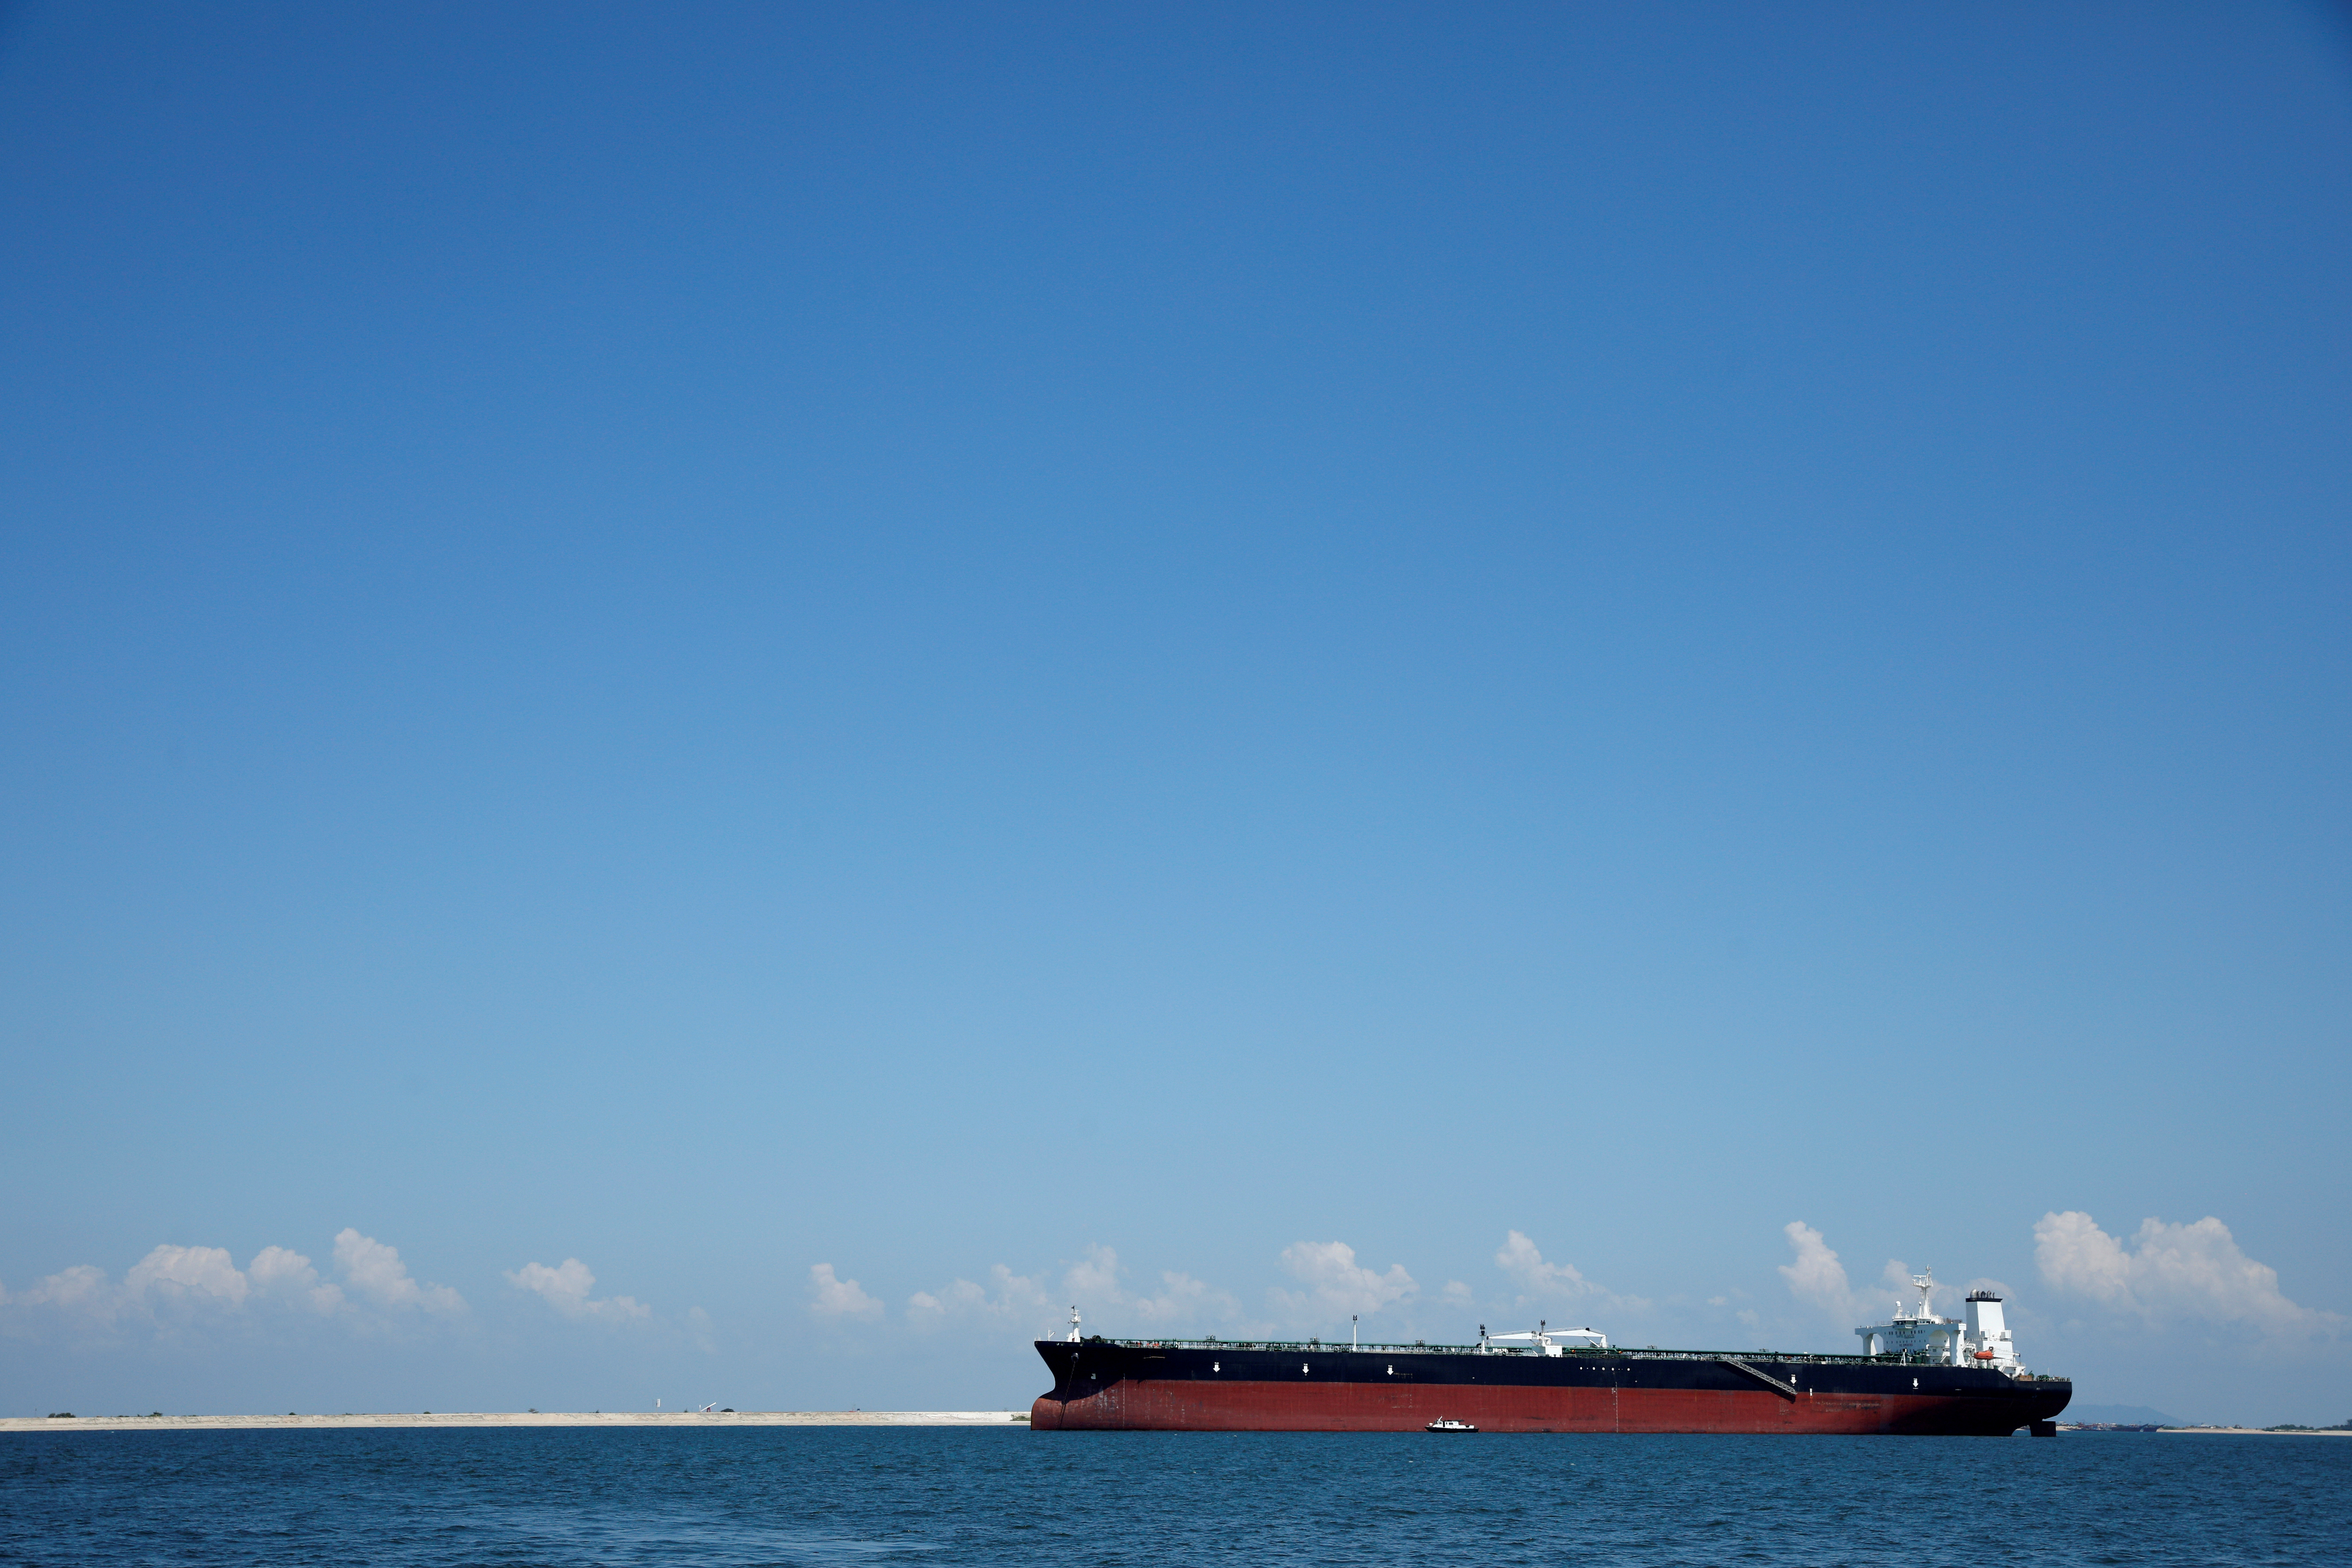 An oil tanker is pictured in the waters off Tuas in Singapore